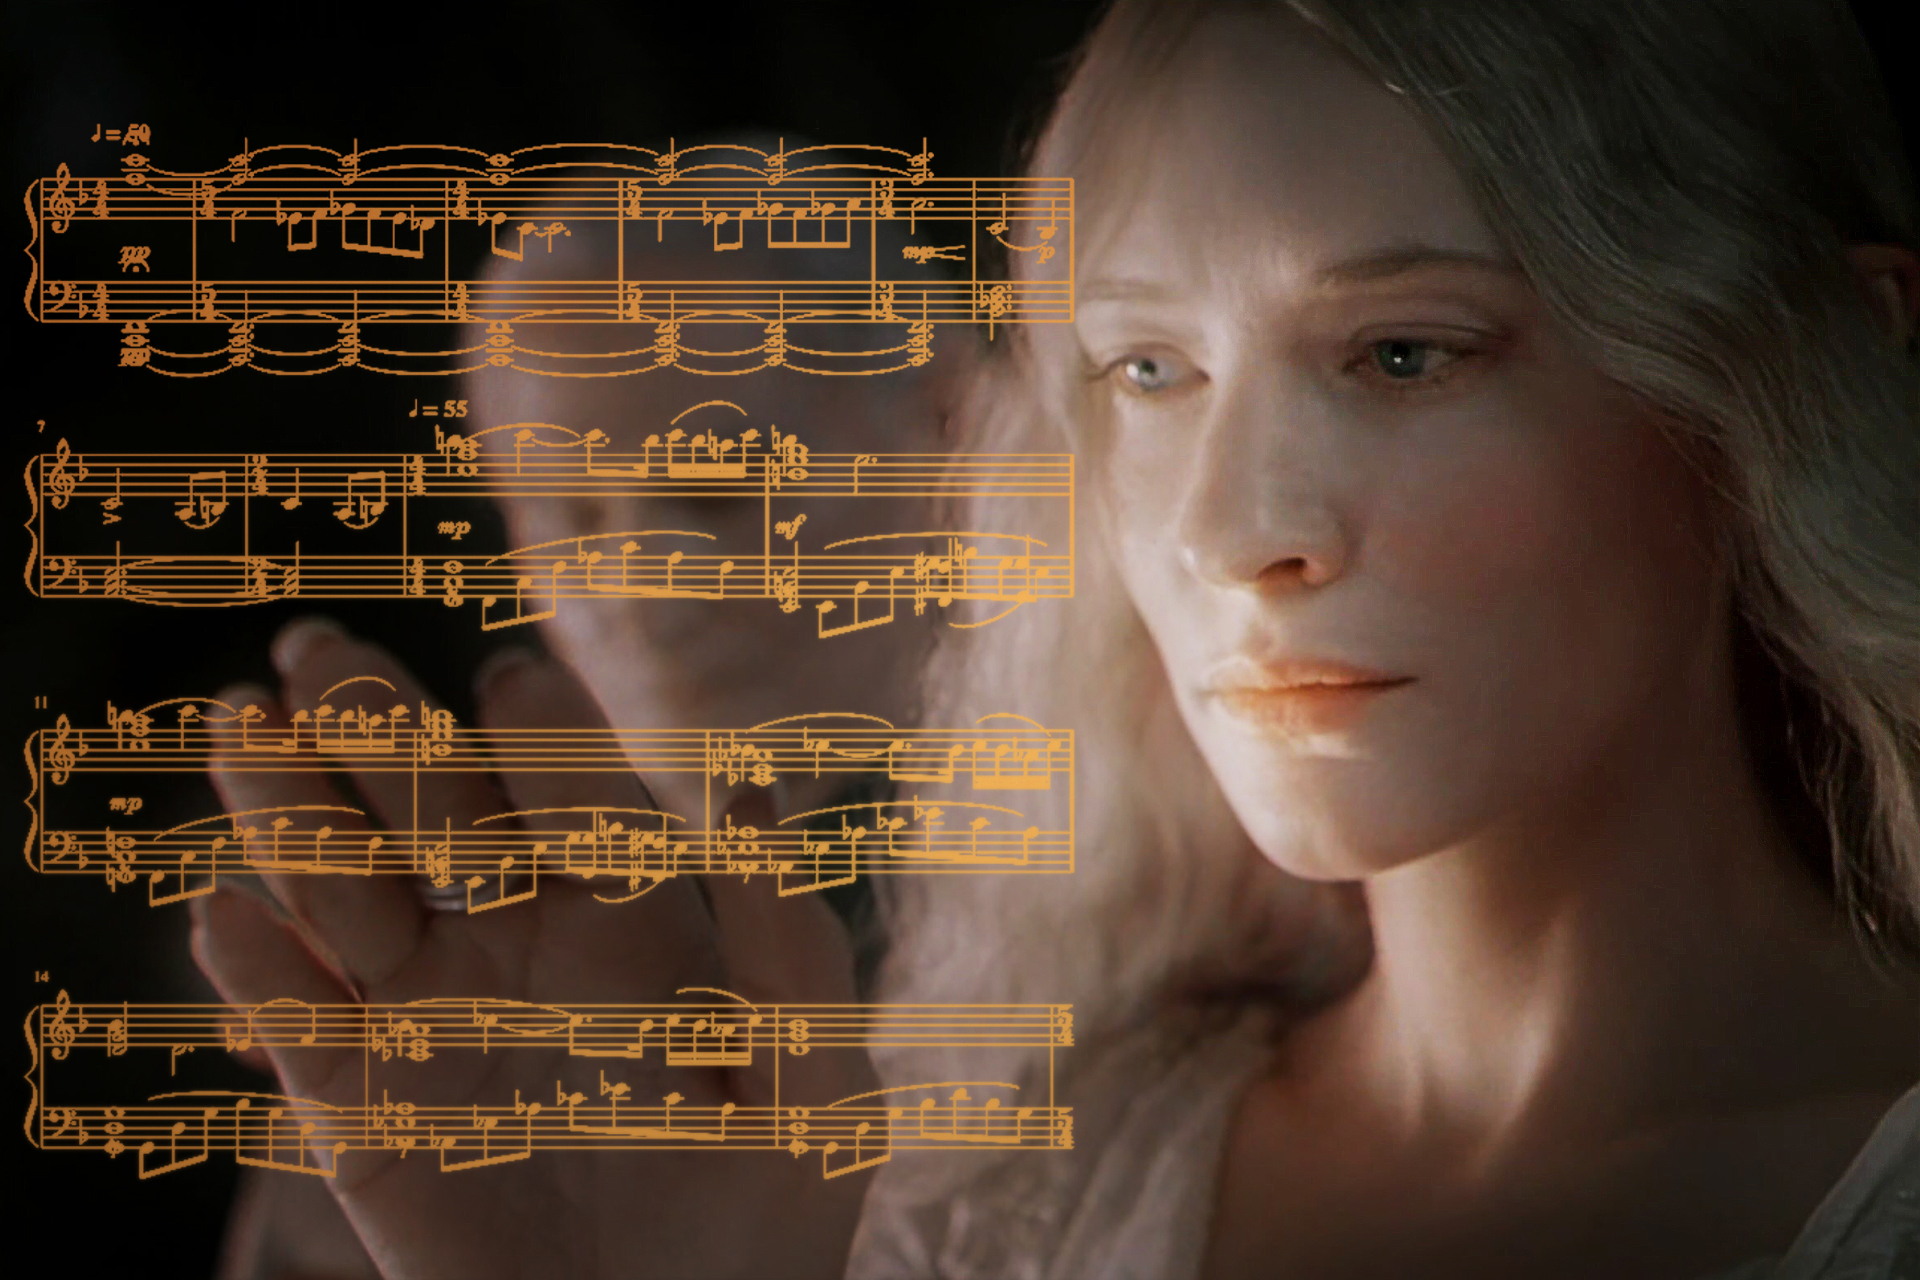 Actress Cate Blanchett&nbsp;as Galadriel from The Lord of the Rings movie looks on wistfully at music from Howard Shores soundtrack